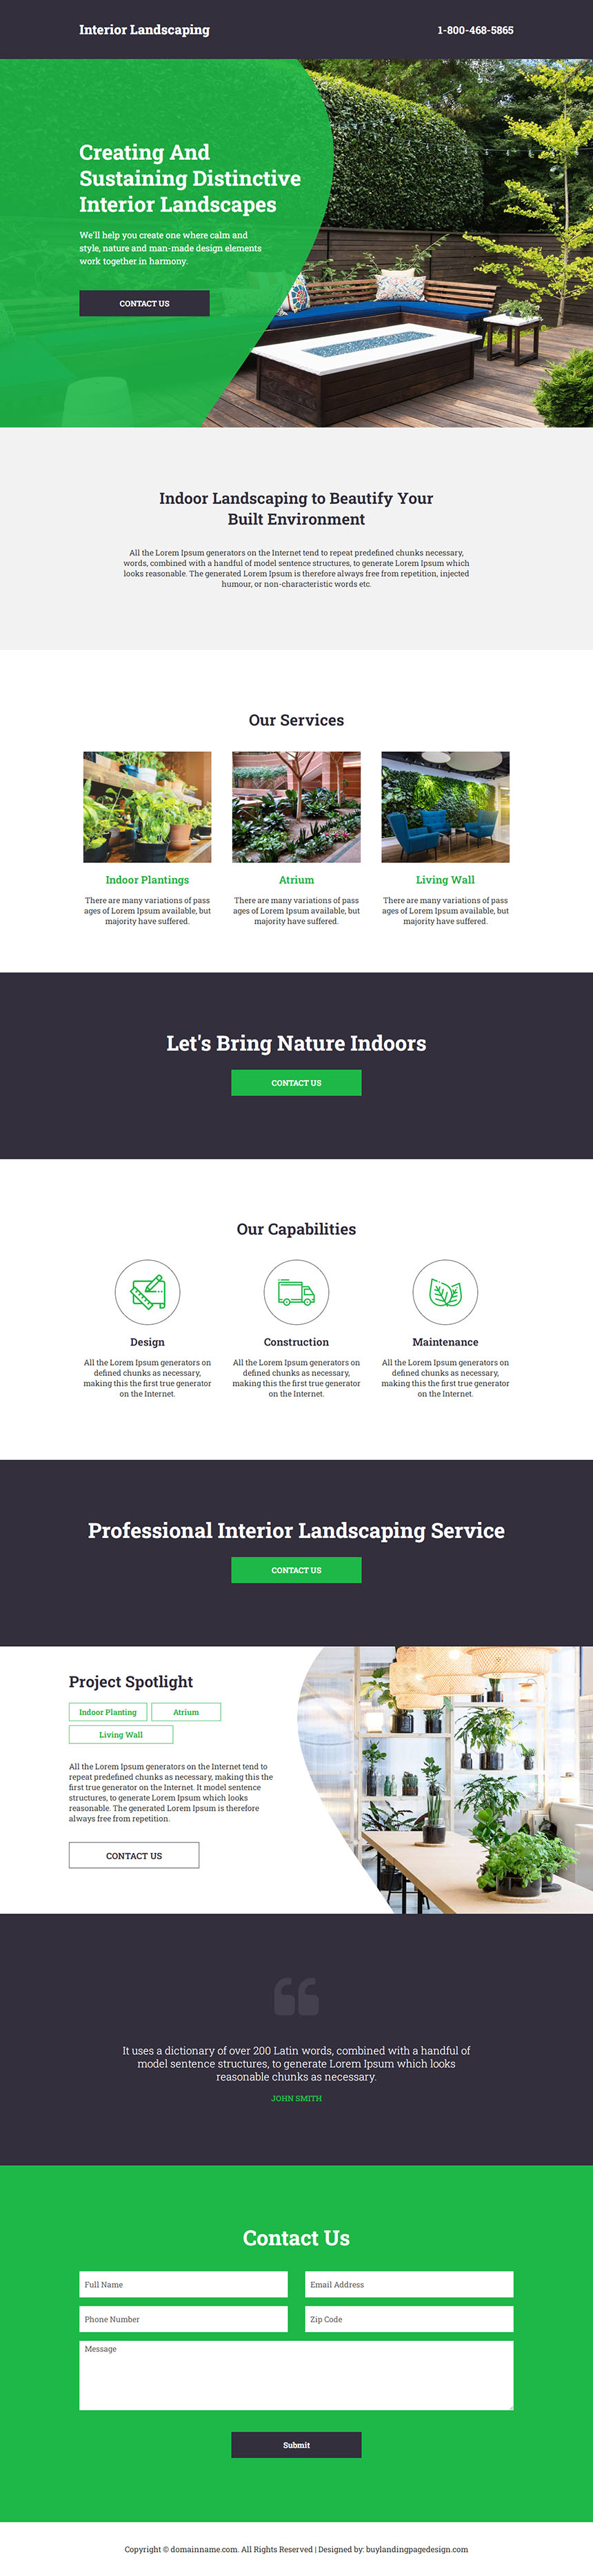 interior landscaping lead generating landing page